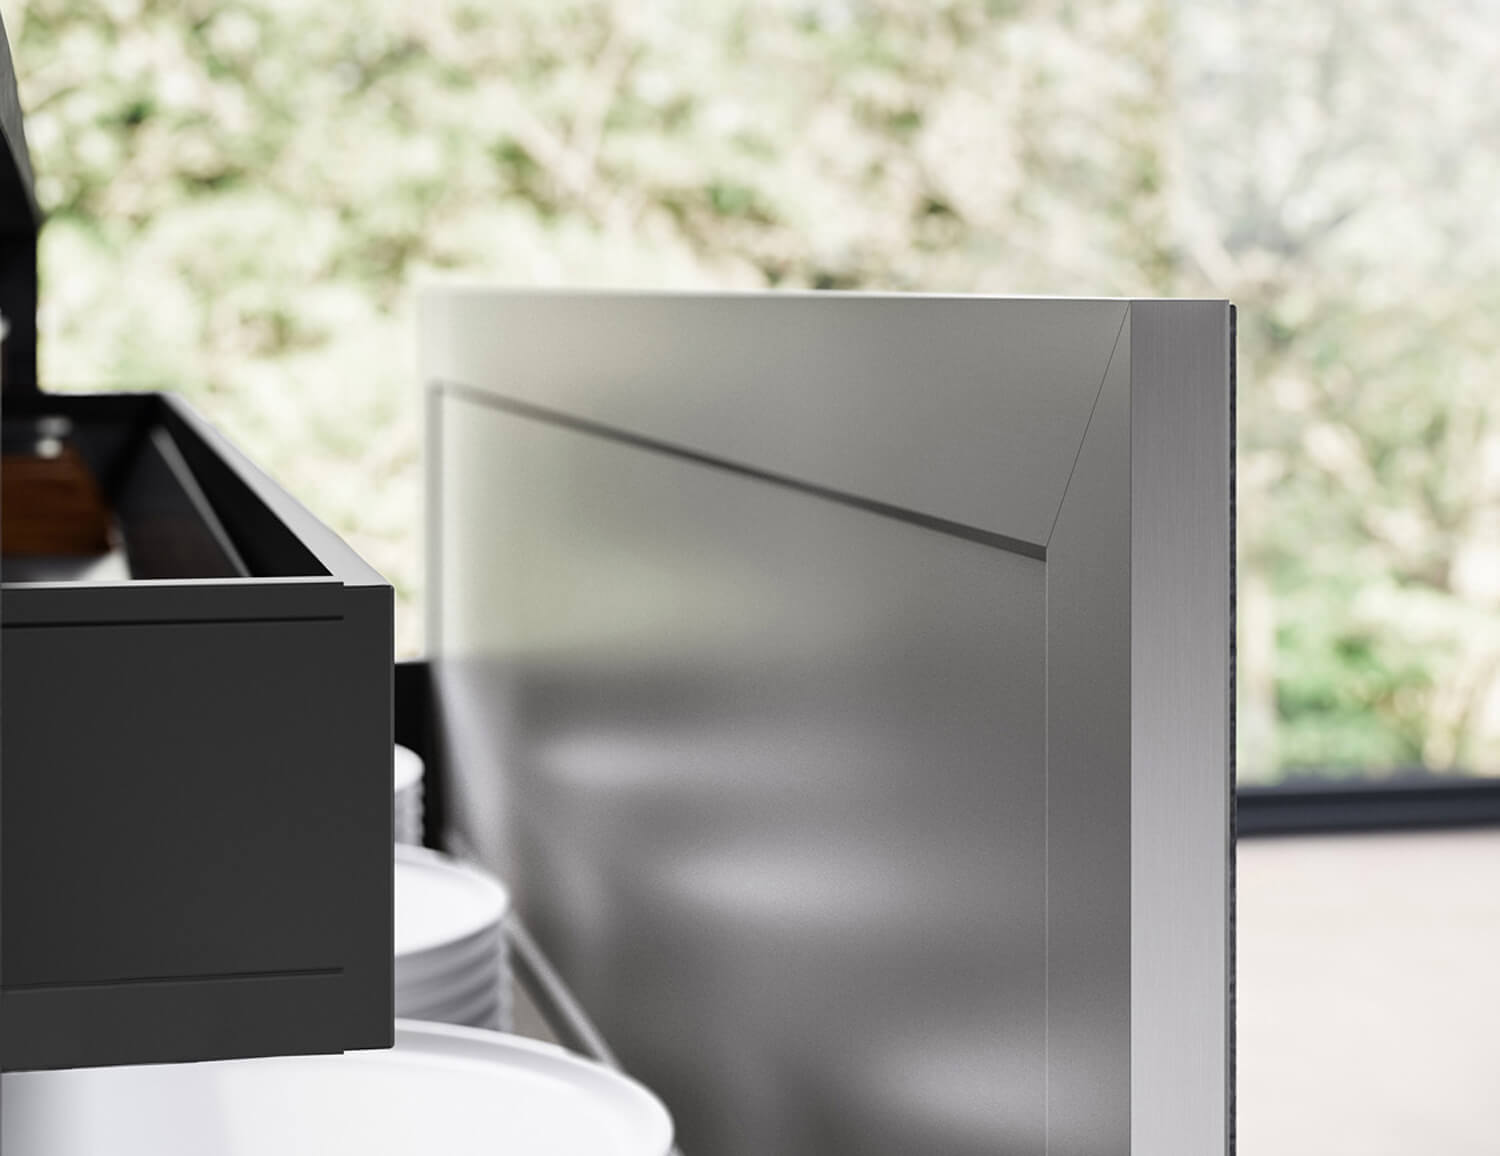 In the T16 design, the cabinet door features an aluminum frame which carries over to the back of the door. 